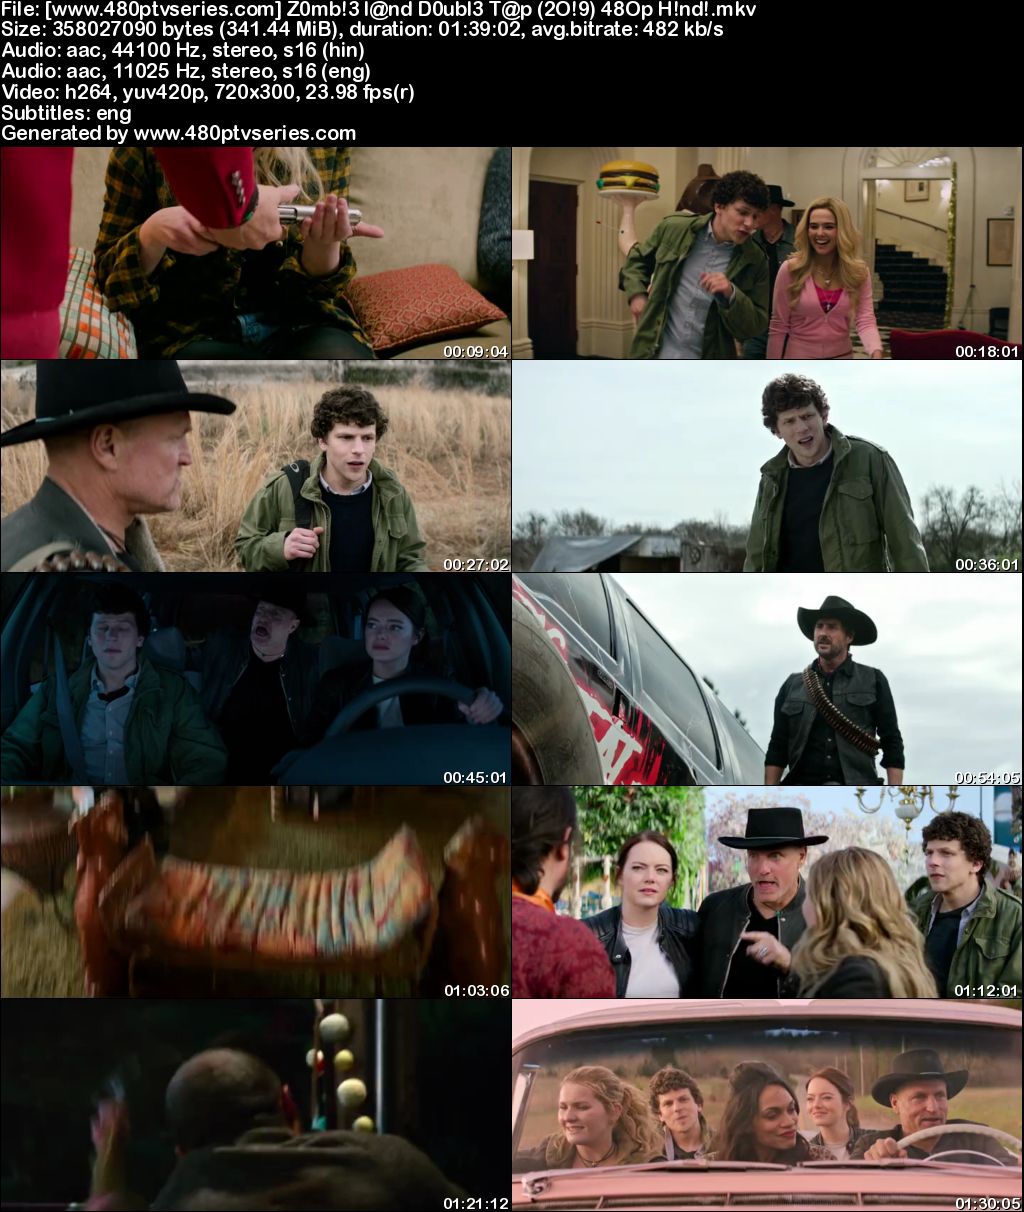 Zombieland: Double Tap (2019) 350MB Full Hindi Dual Audio Movie Download 480p Bluray Free Watch Online Full Movie Download Worldfree4u 9xmovies